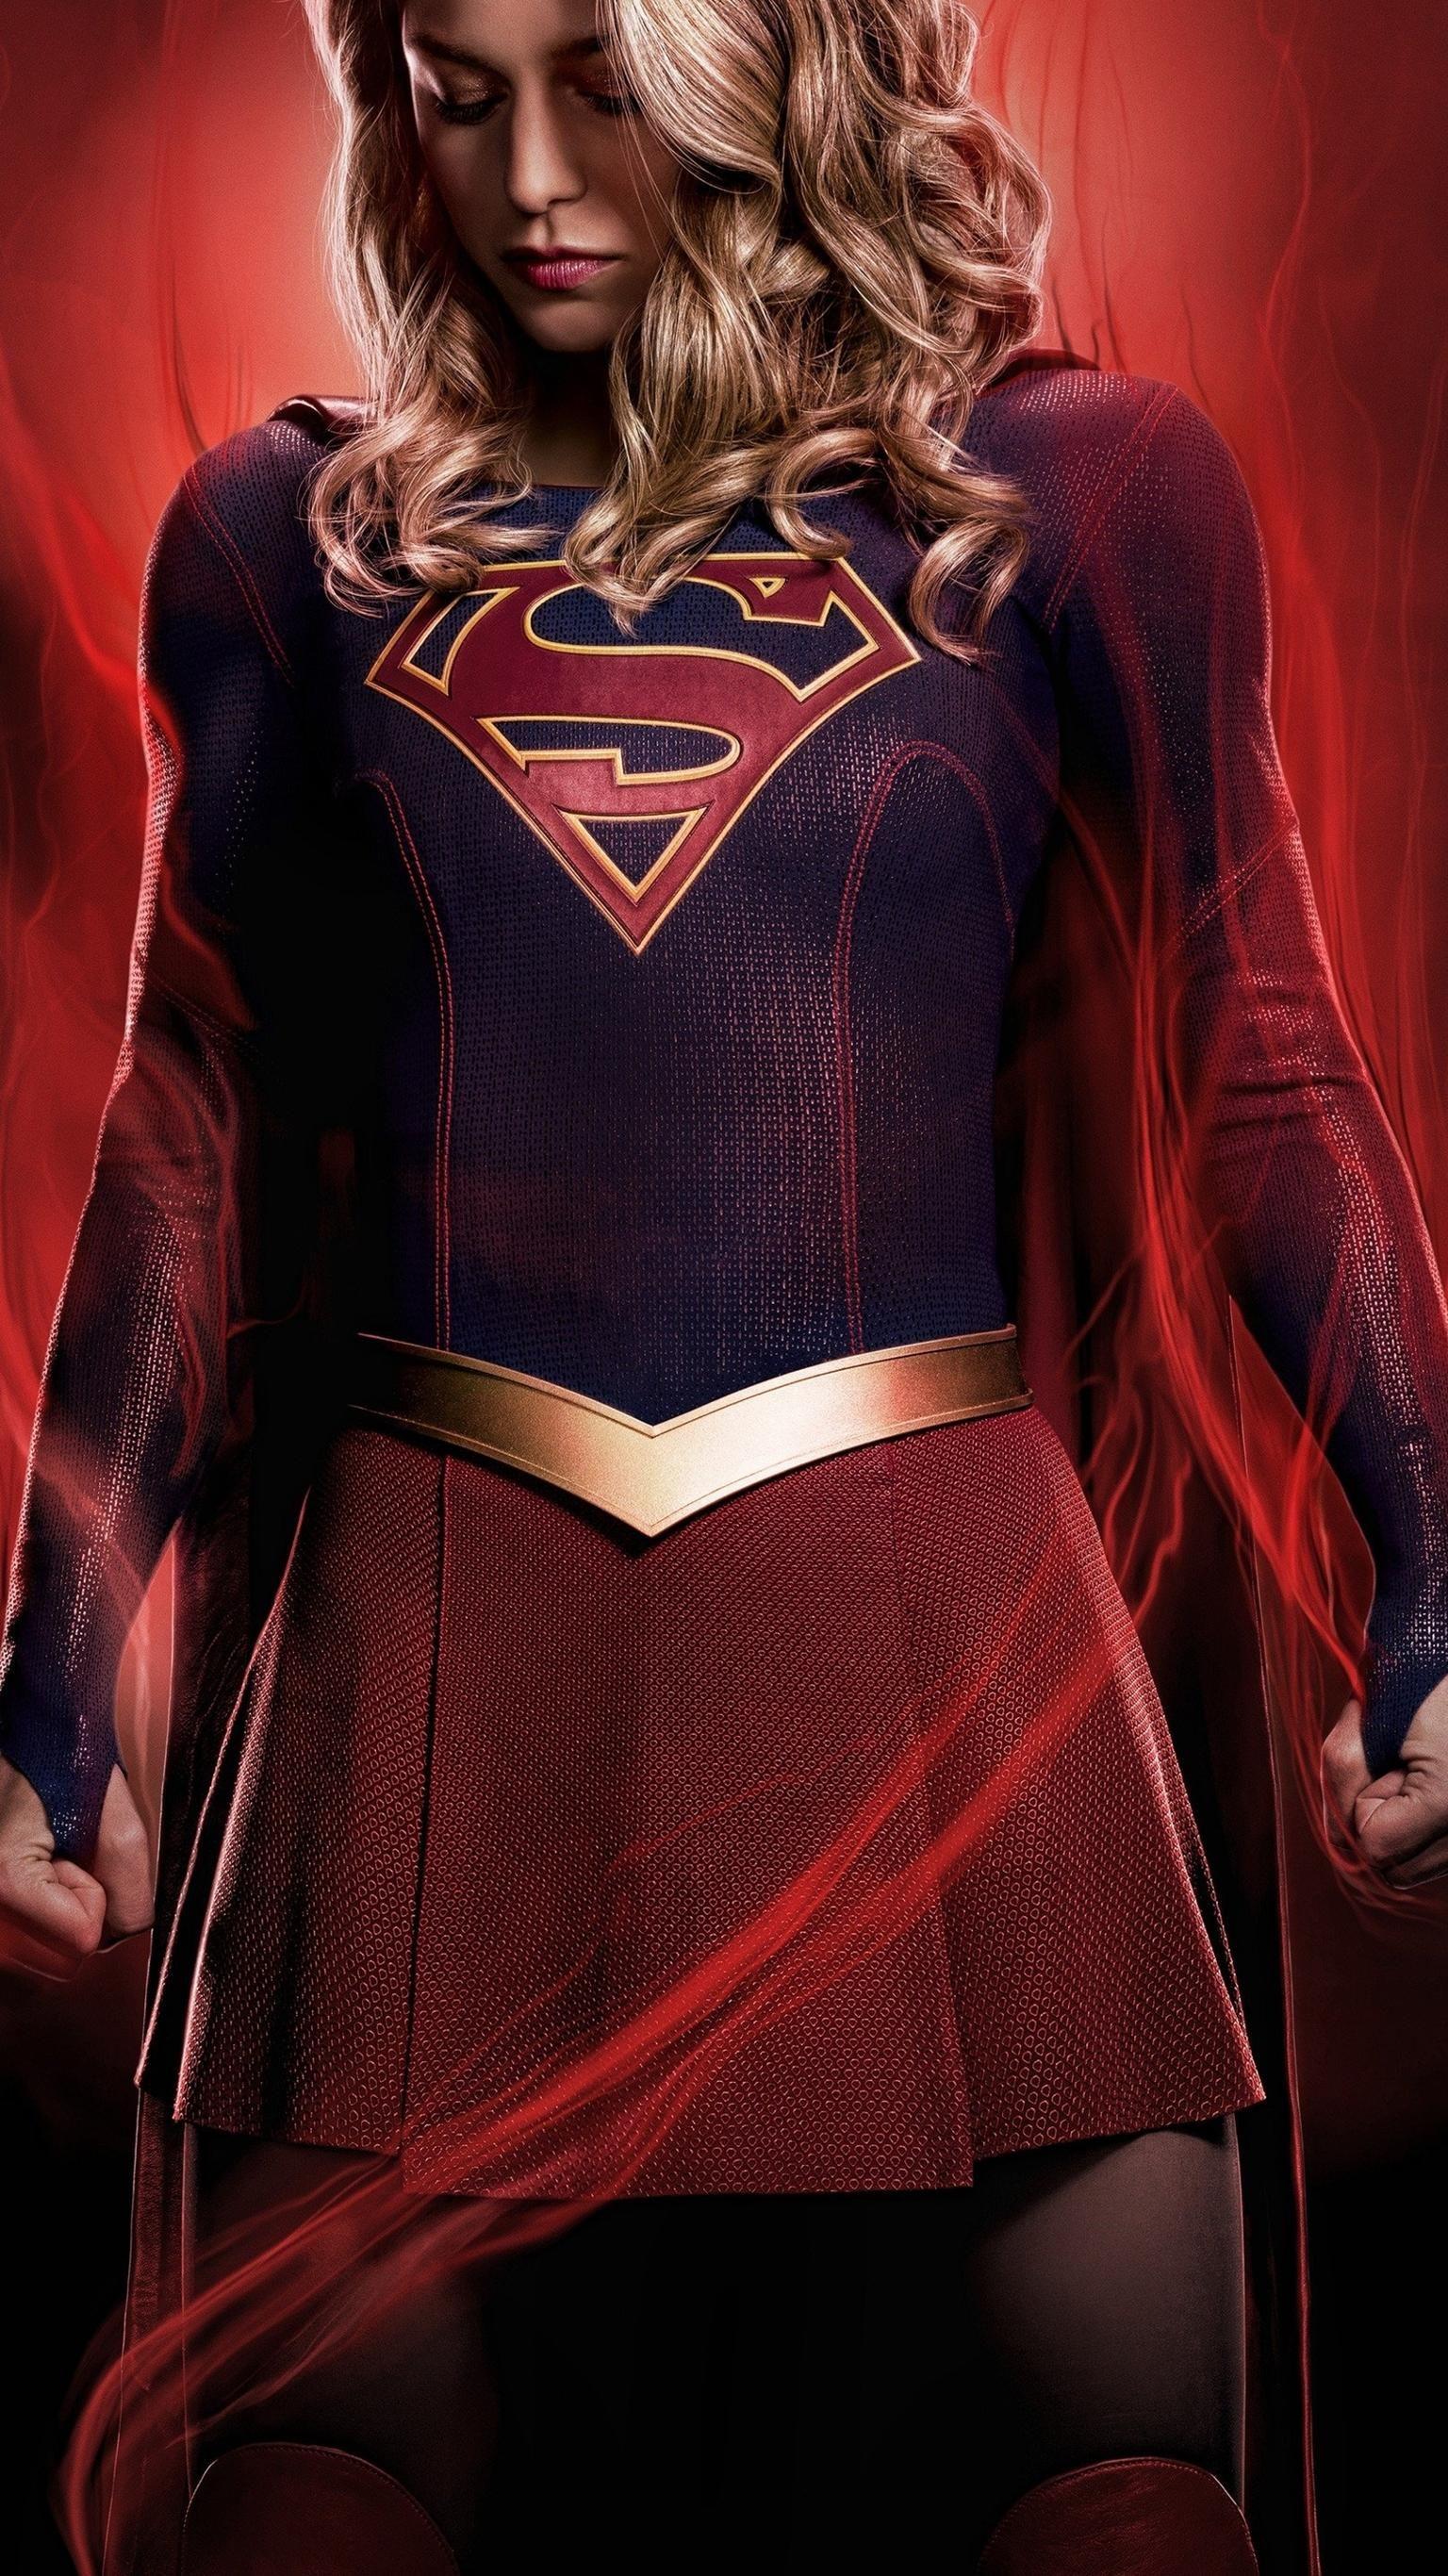 Supergirl Wallpapers - Top Free Supergirl Backgrounds - WallpaperAccess